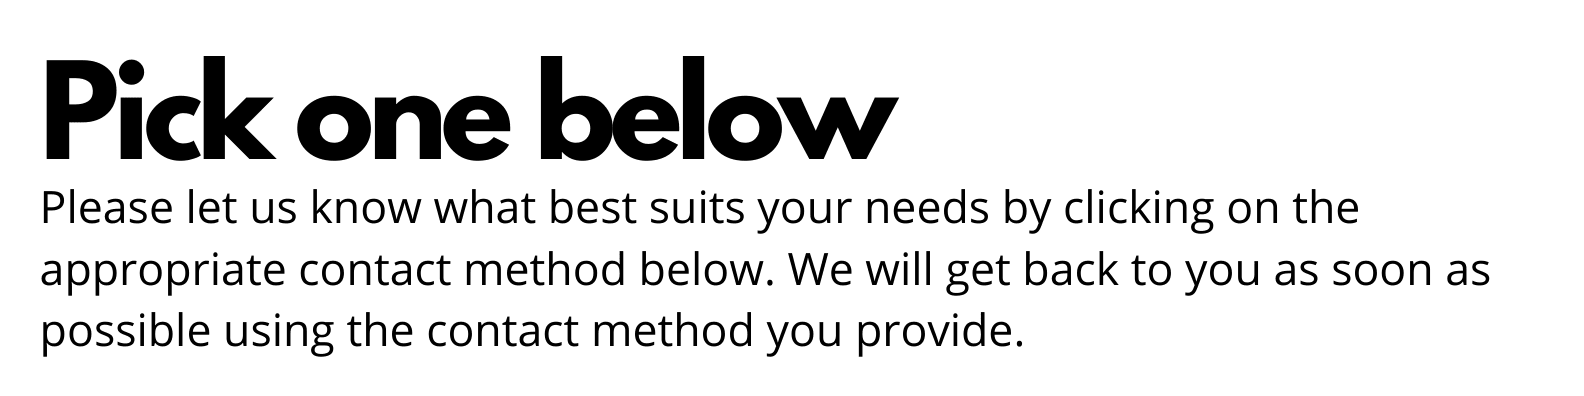 Please pick a contact method below to let us know what best suits your needs and we will get back to you as soon as possible via the contact method you provide